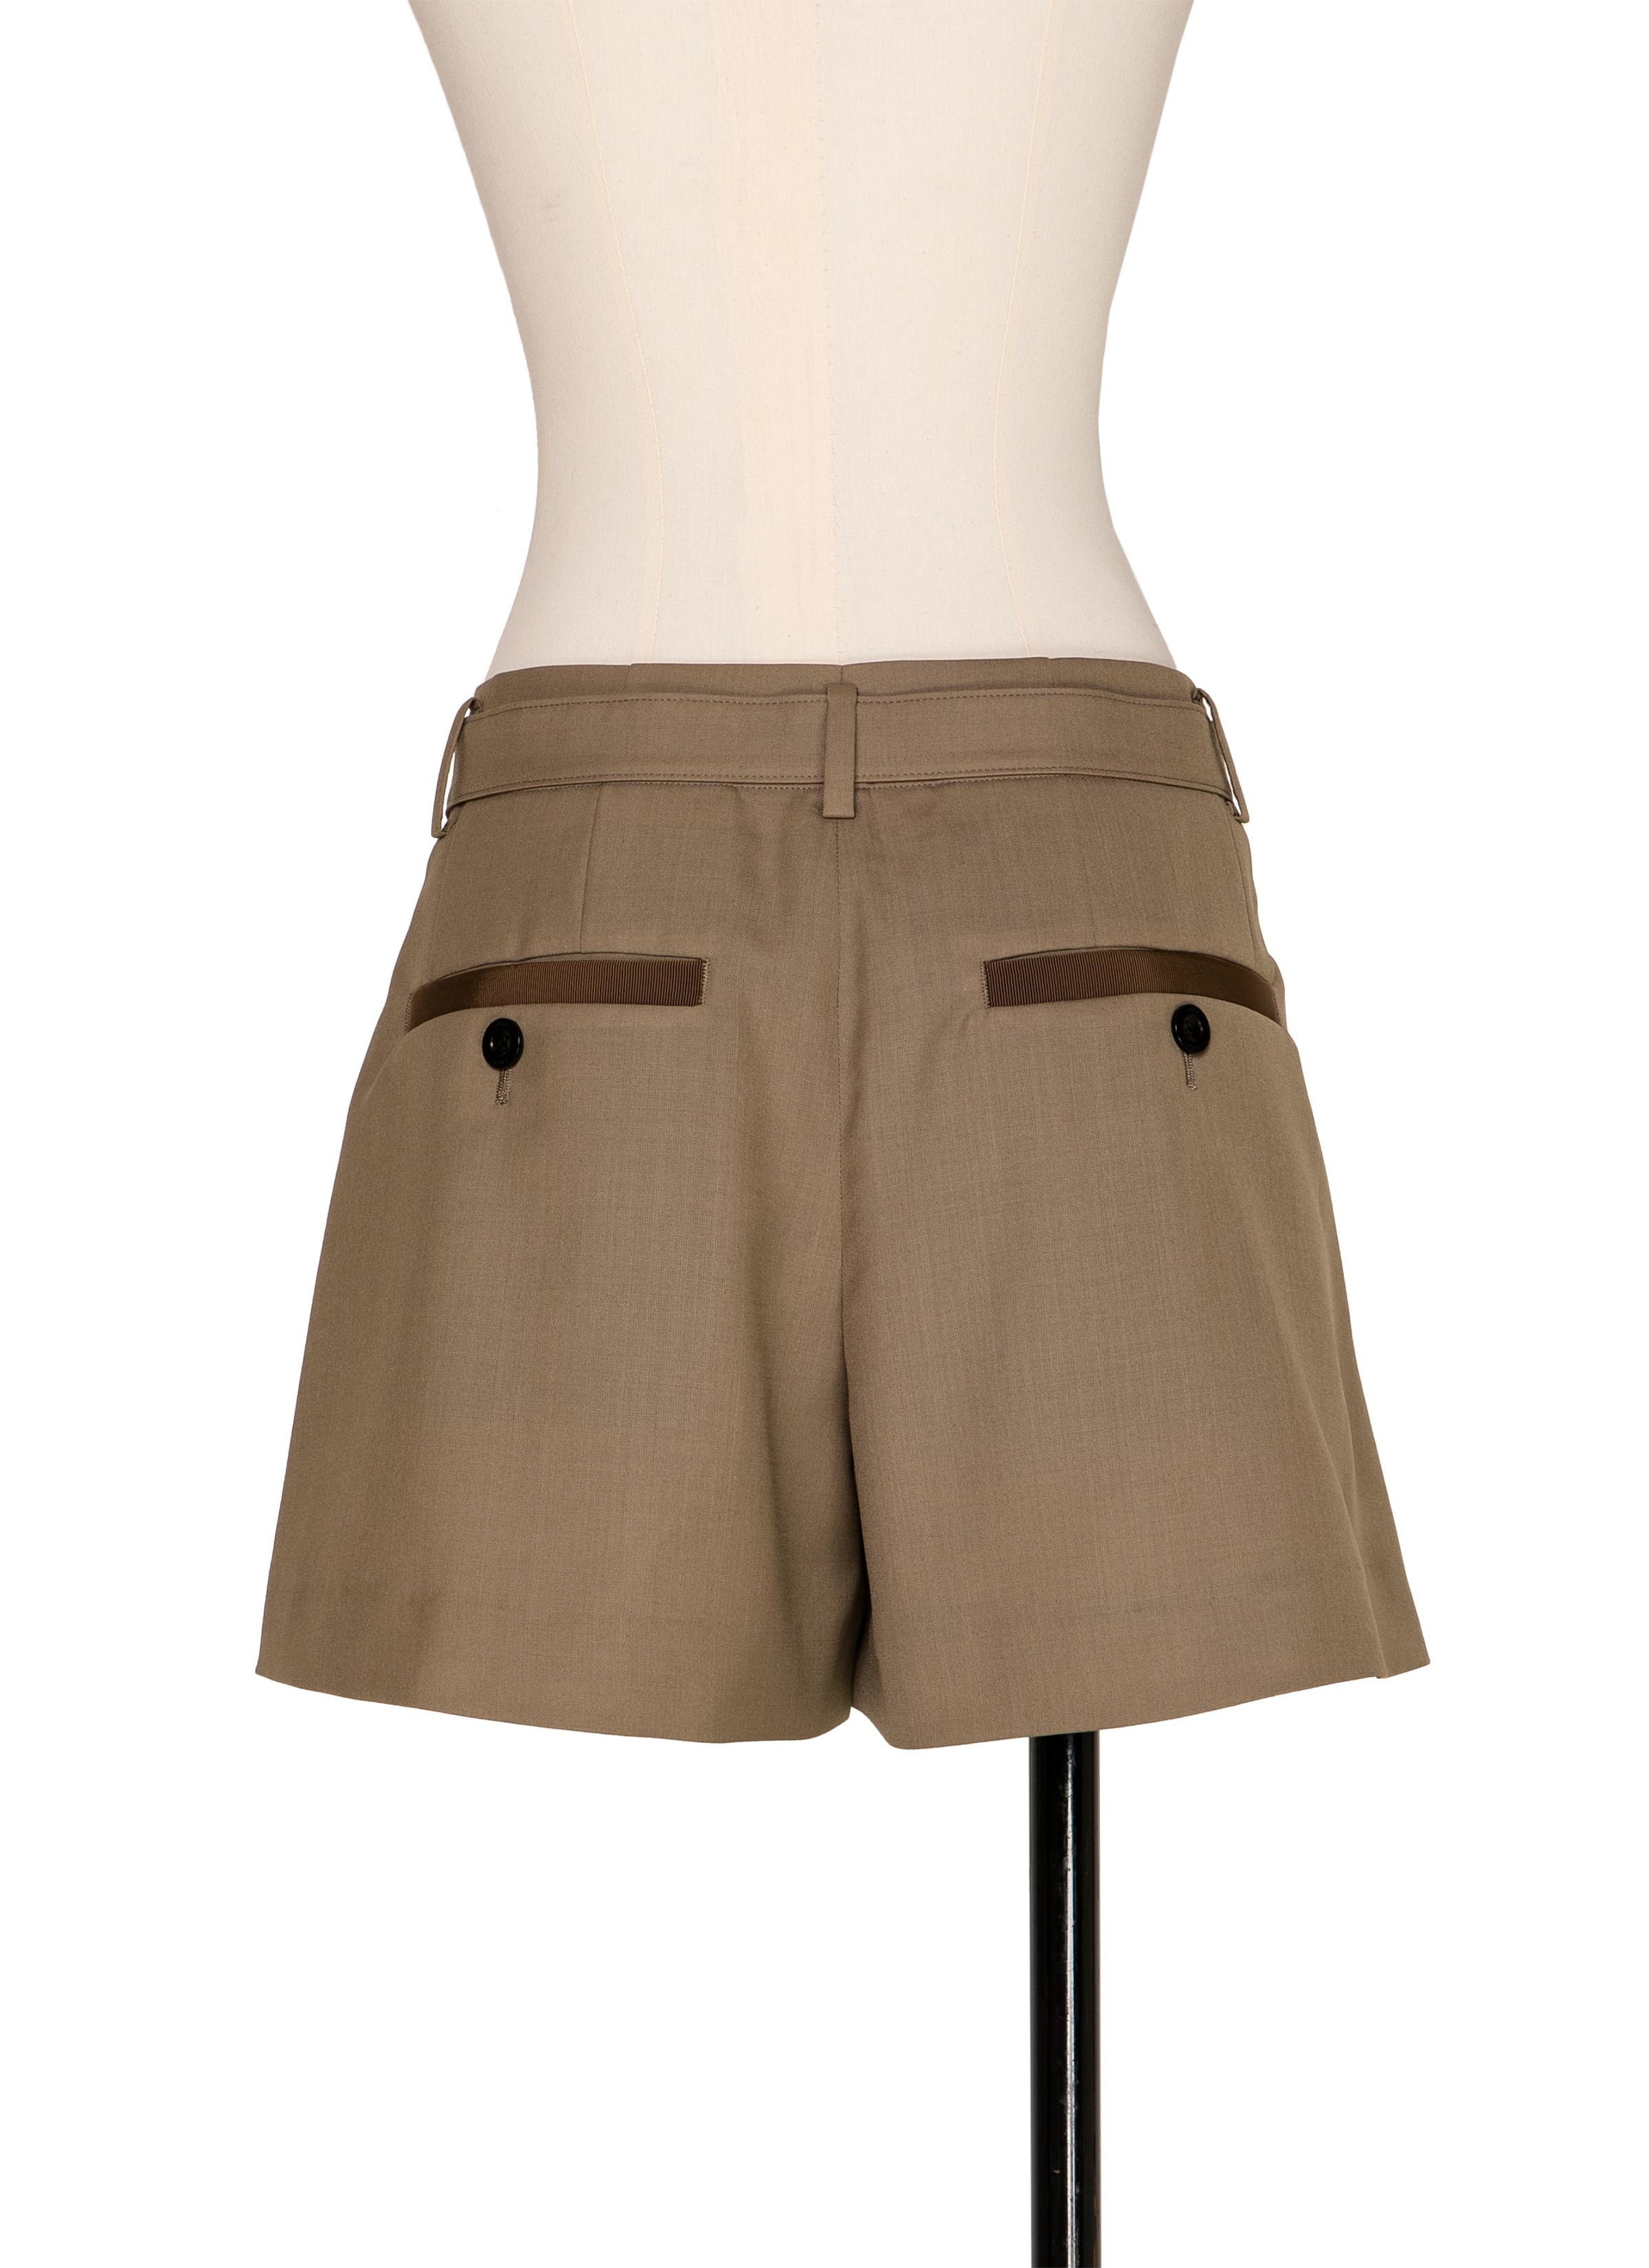 Suiting Shorts 詳細画像 BEIGE 3